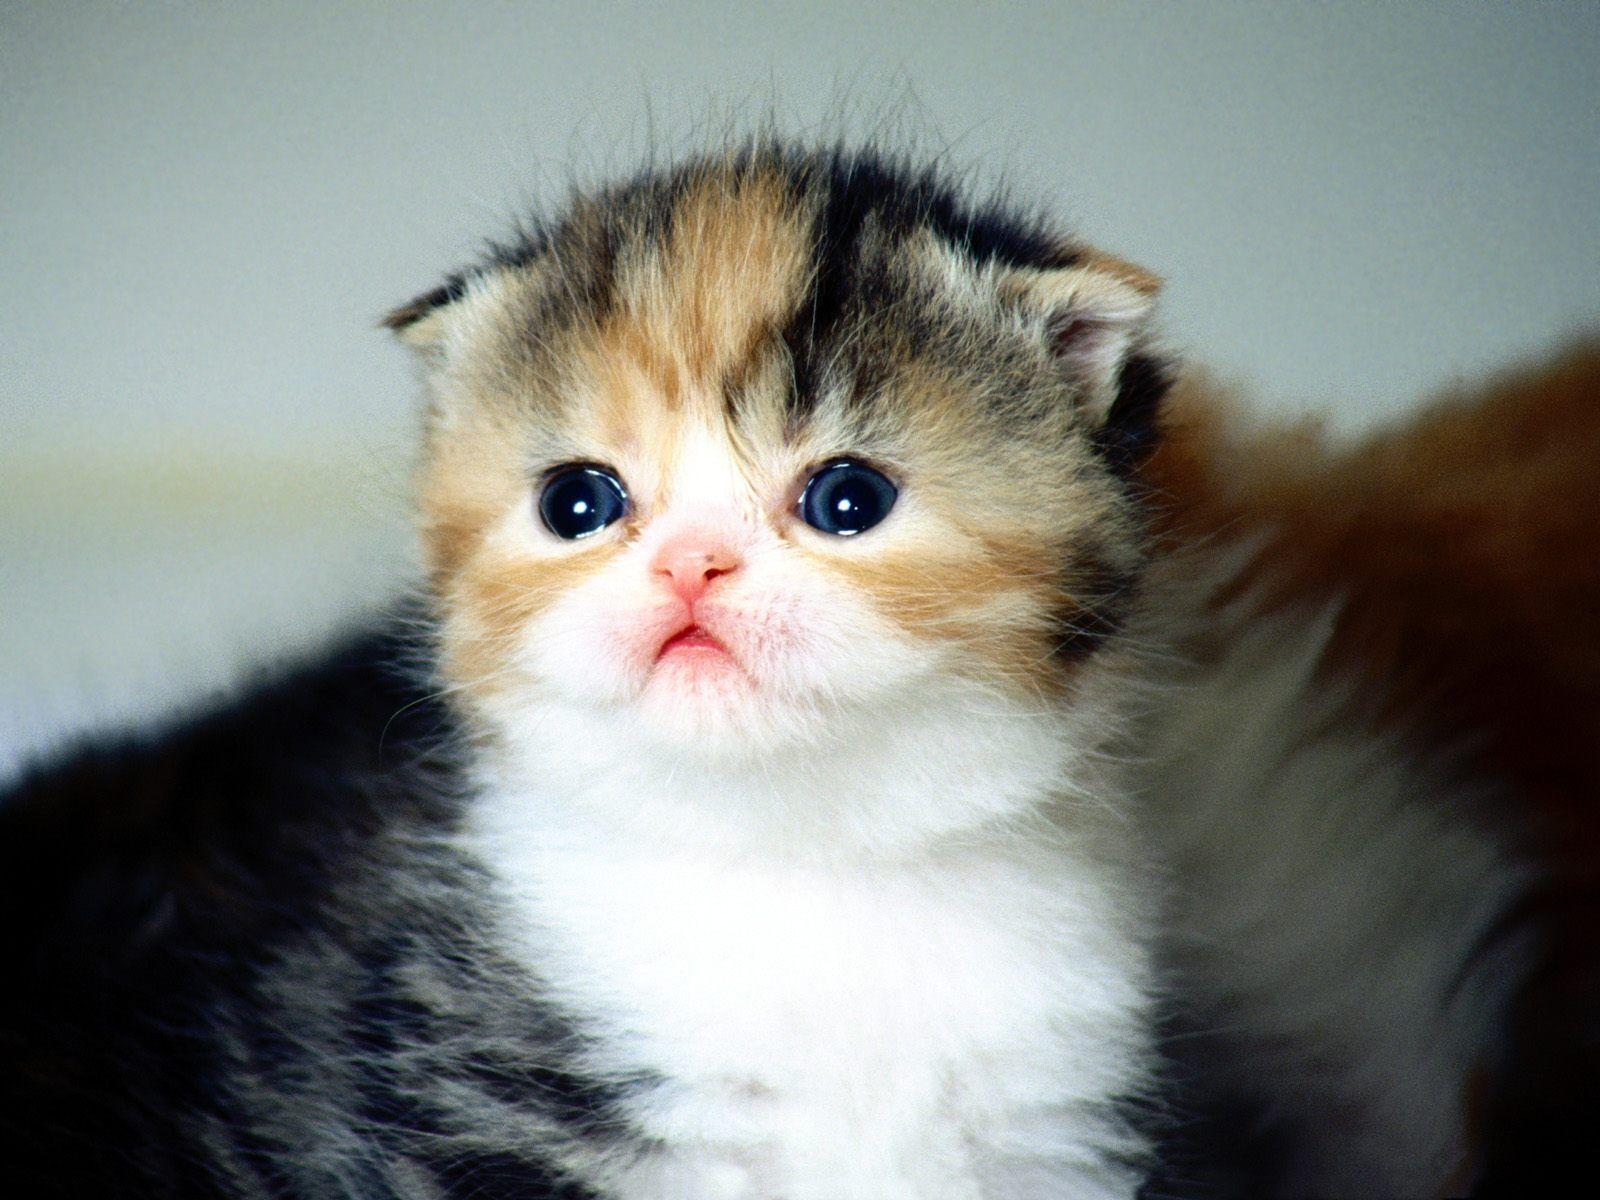 Cute Baby Cat Wallpaper And Cute Baby Cat Pics And Cat Image